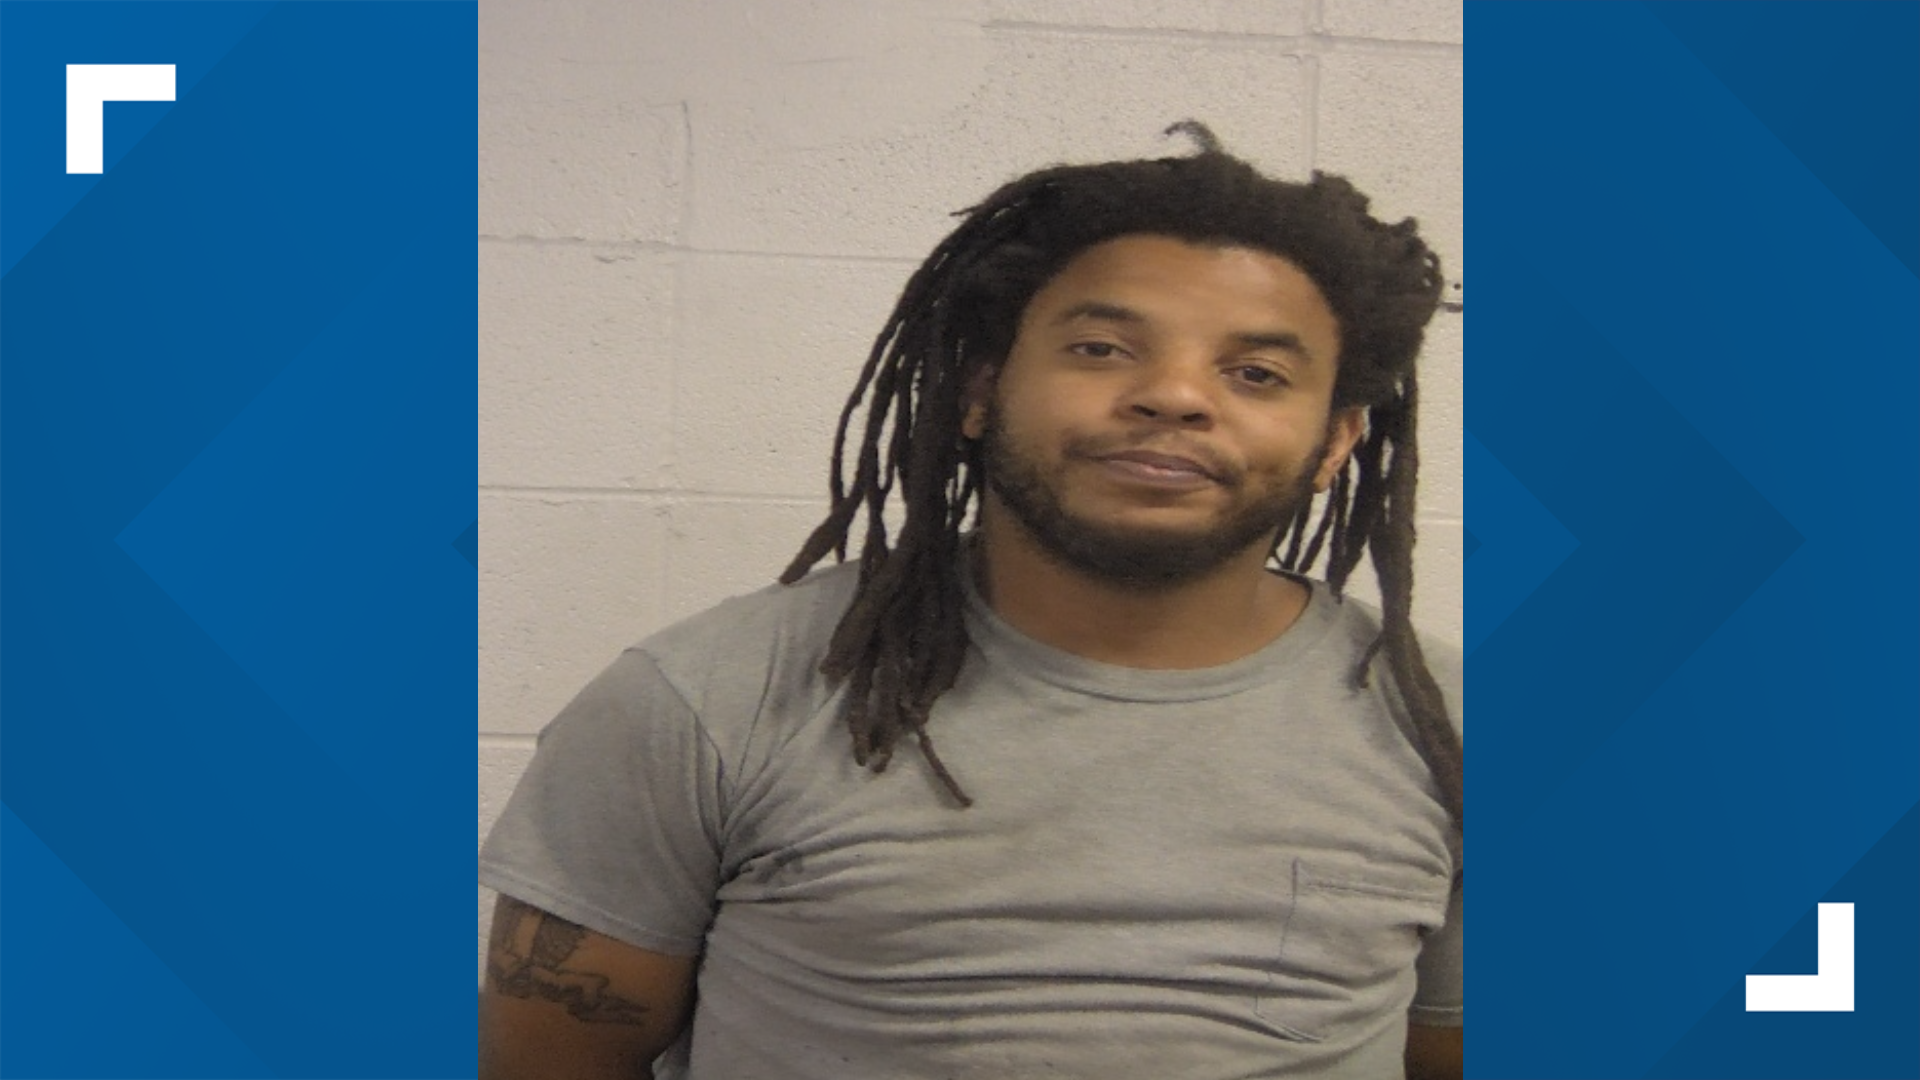 Police said the suspect, 30-year-old Antwon Brown, was arrested without incident Tuesday and charged with assault.